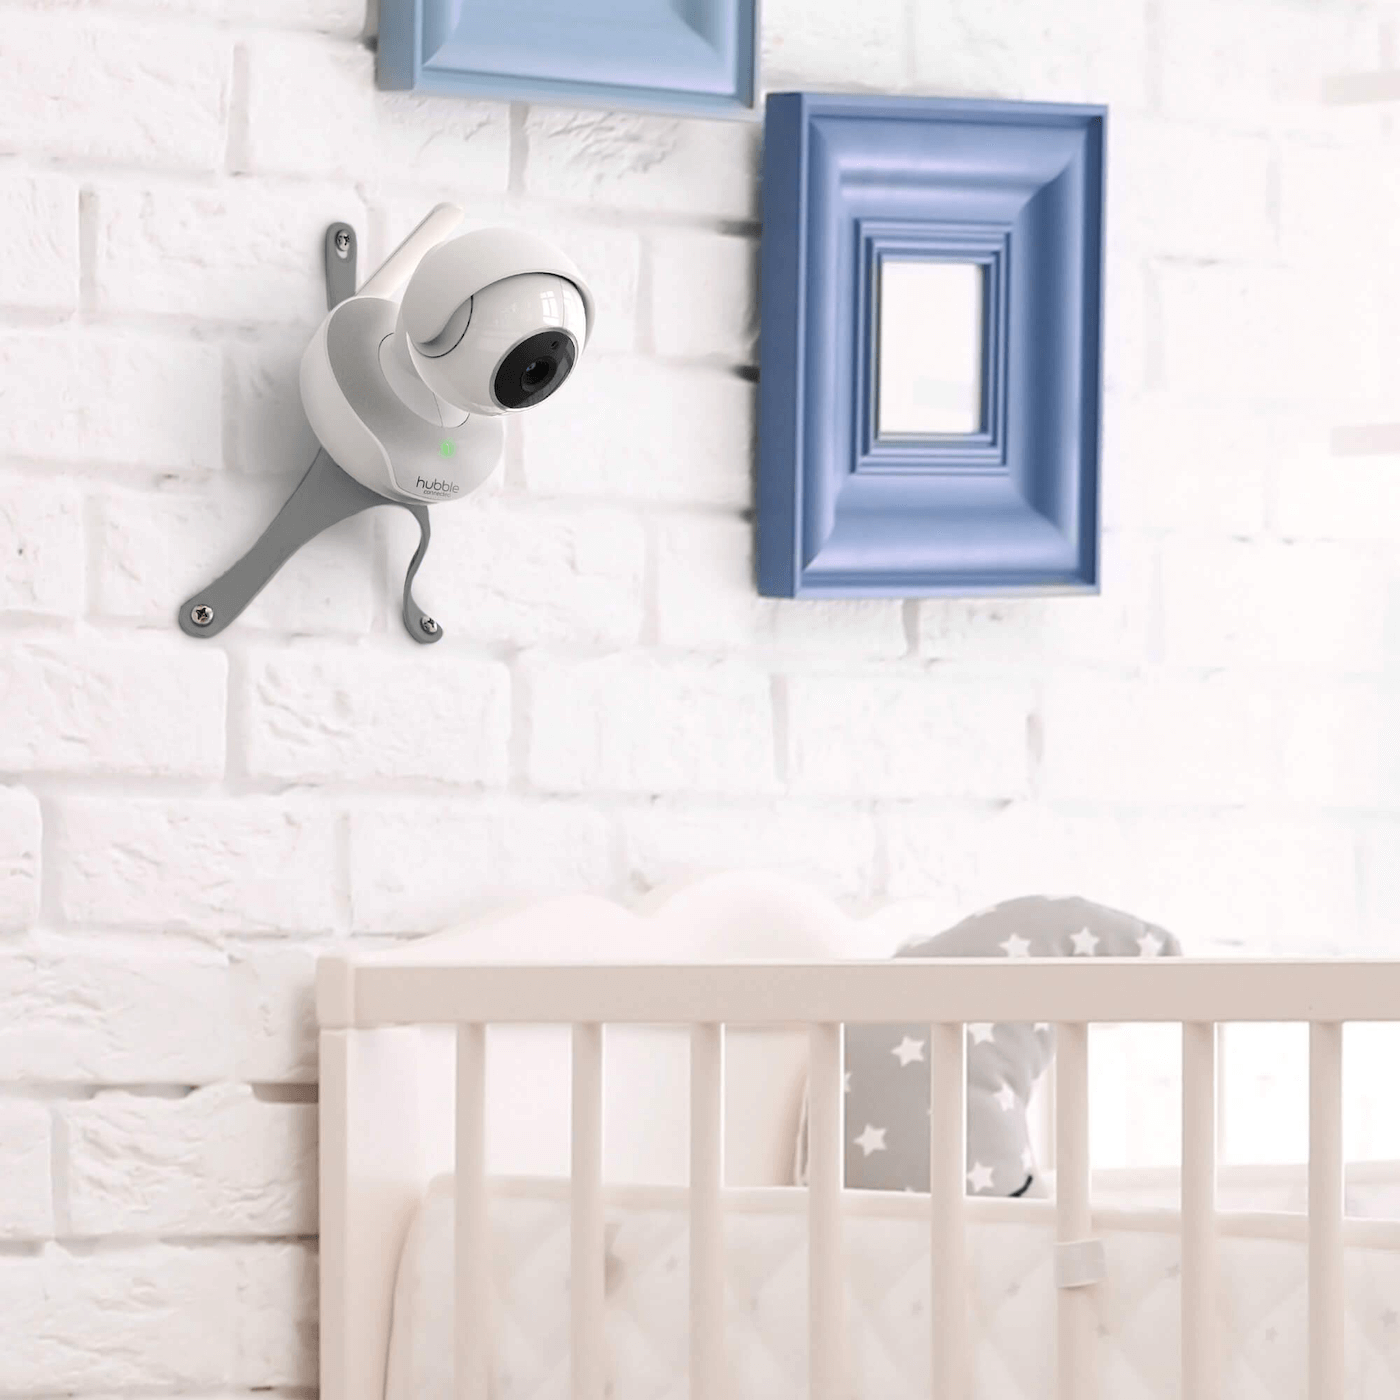 Baby Monitor Camera Clamp Holder for Cot Bed & Baby Crib